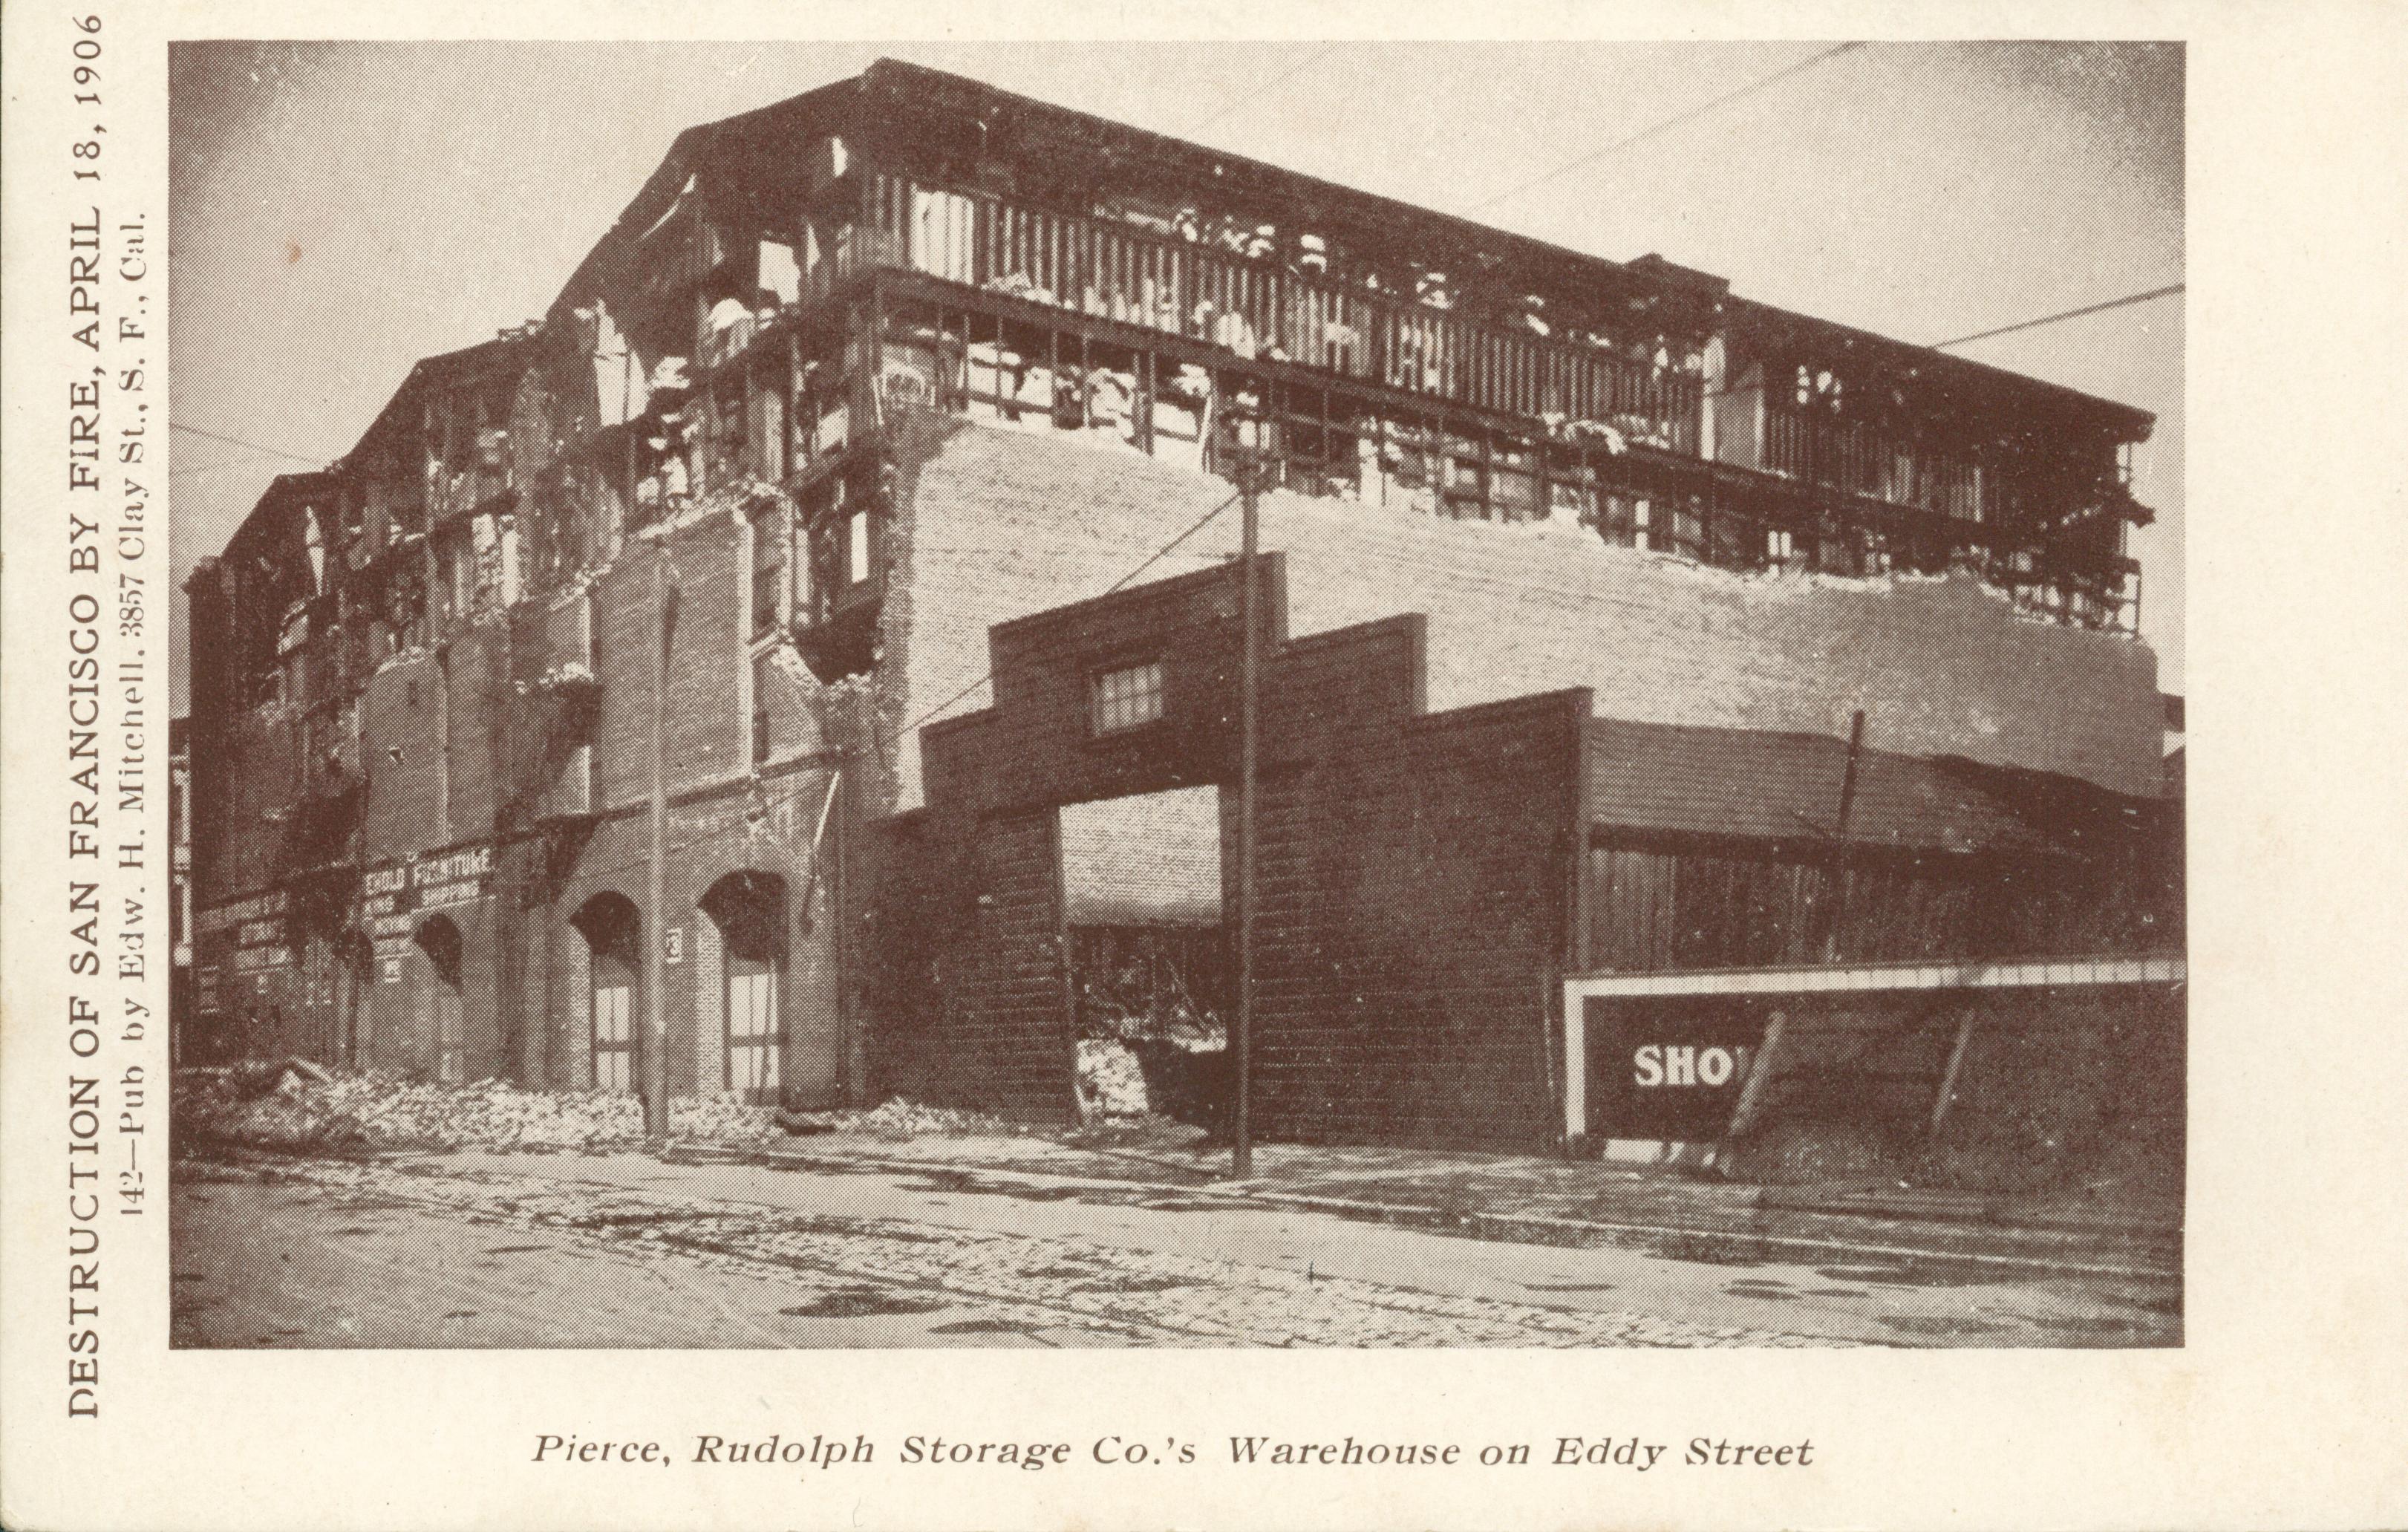 Shows the ruins of the Pierce, Rudolph Storage Company Warehouse after the fire